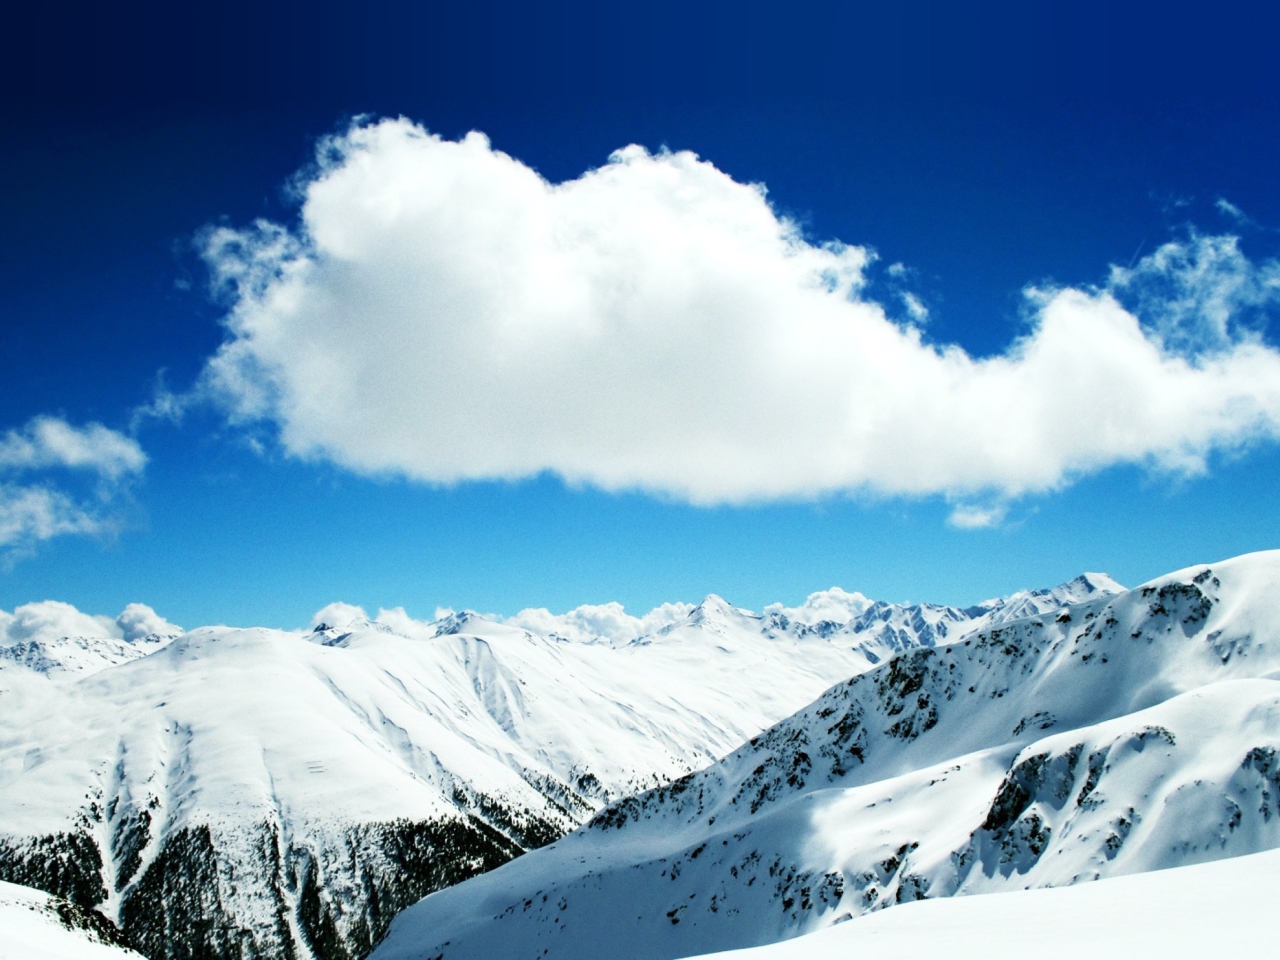 White Cloud And Mountains wallpaper 1280x960